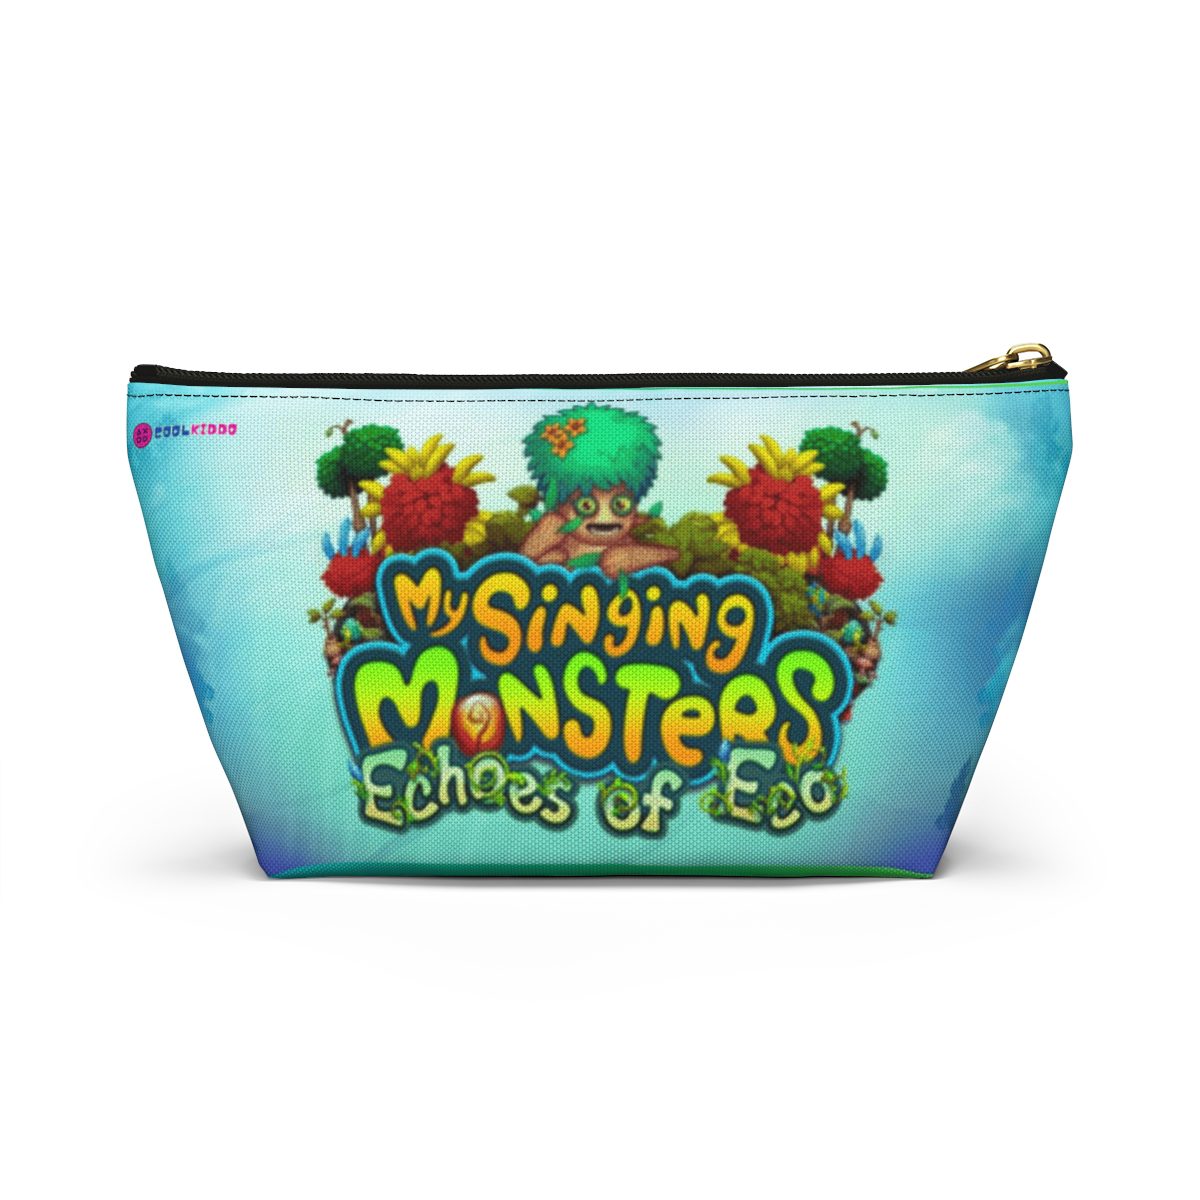 My Singing Monsters Echoes of Eco Pencil Pouch Cool Kiddo 24